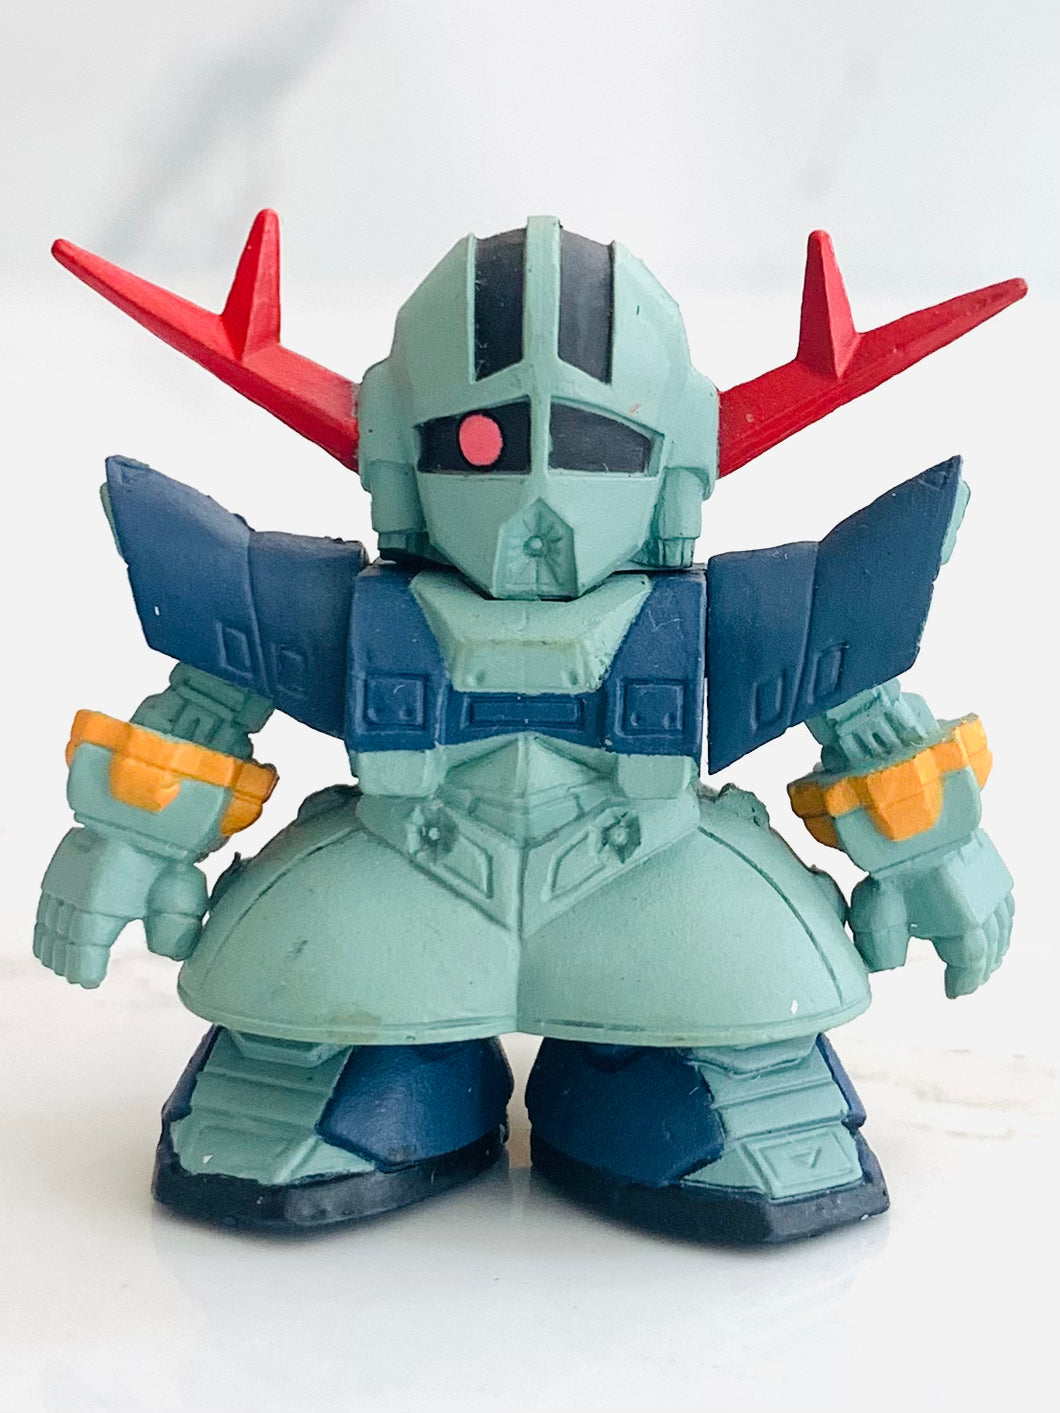 Mobile Suit Gundam - MSN-02 Perfect Zeong - SD Gundam Full Color Stage 5